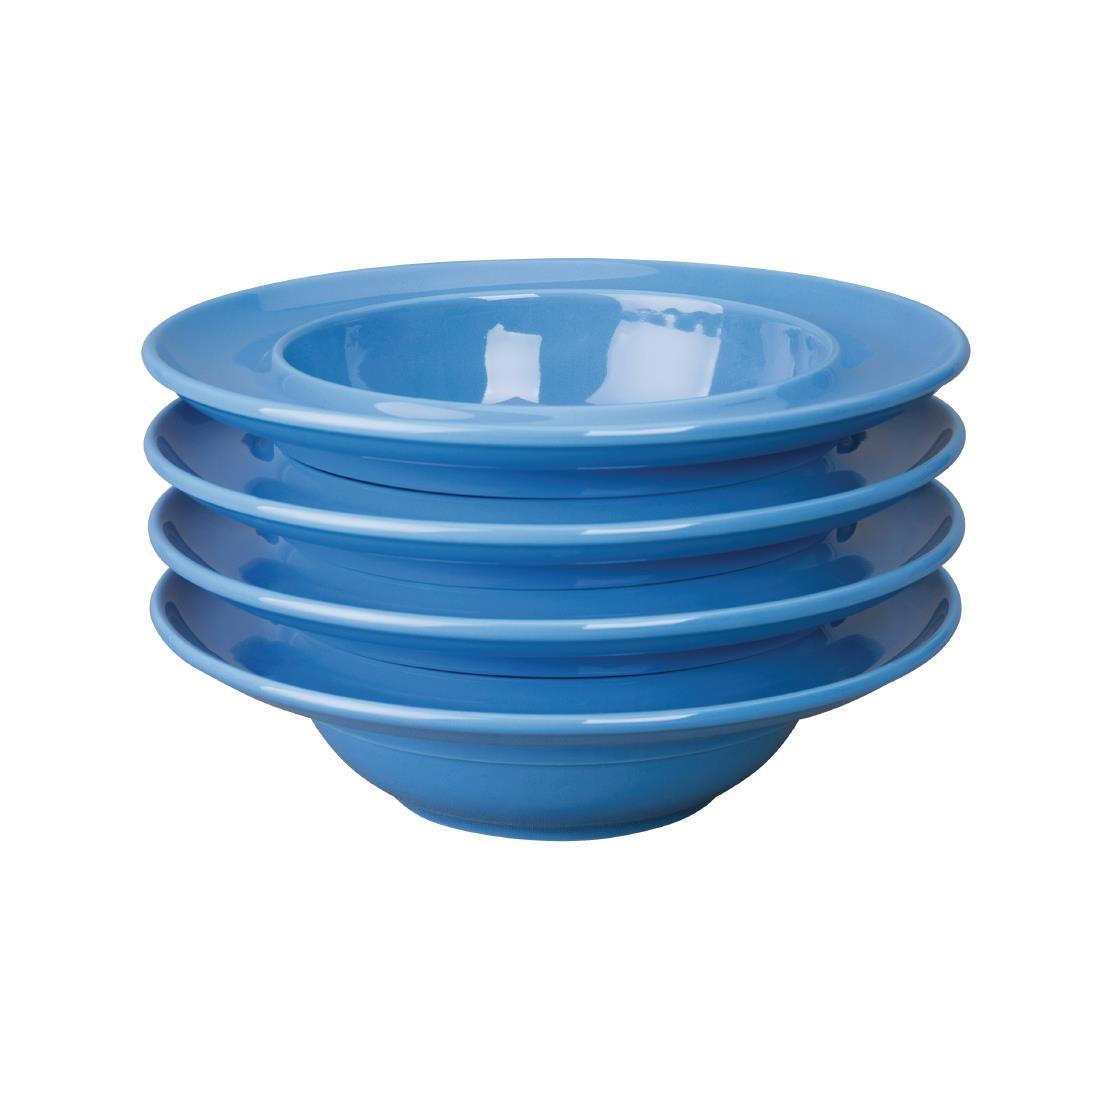 Olympia Heritage Raised Rim Bowl Blue 205mm (Pack of 4) - DW142  - 4